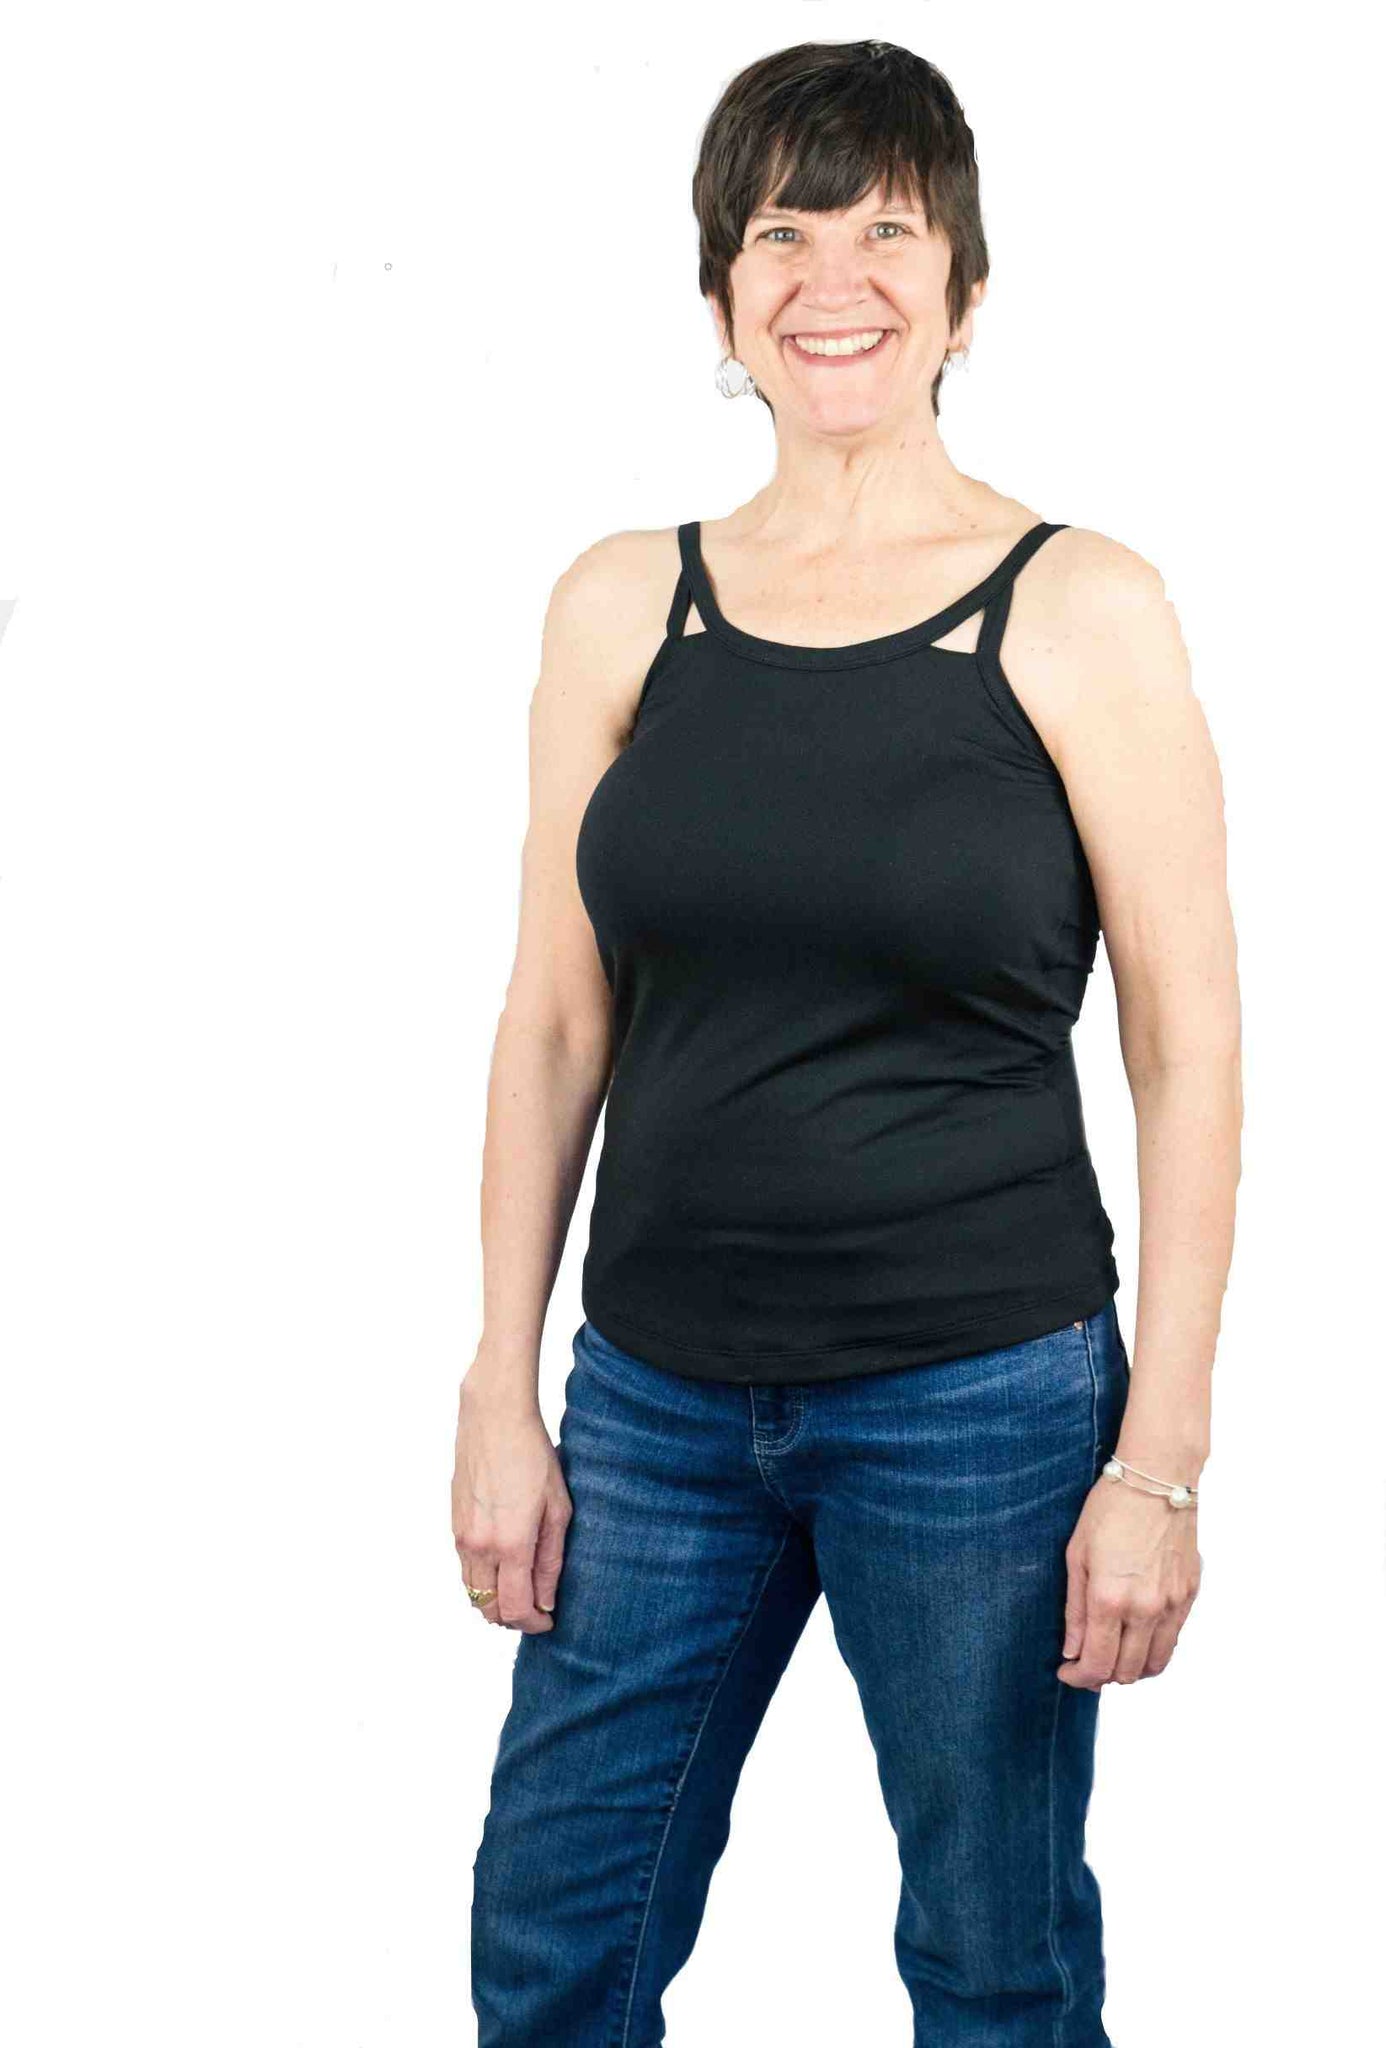 Mastectomy Bras - For One Or Two Breast Forms